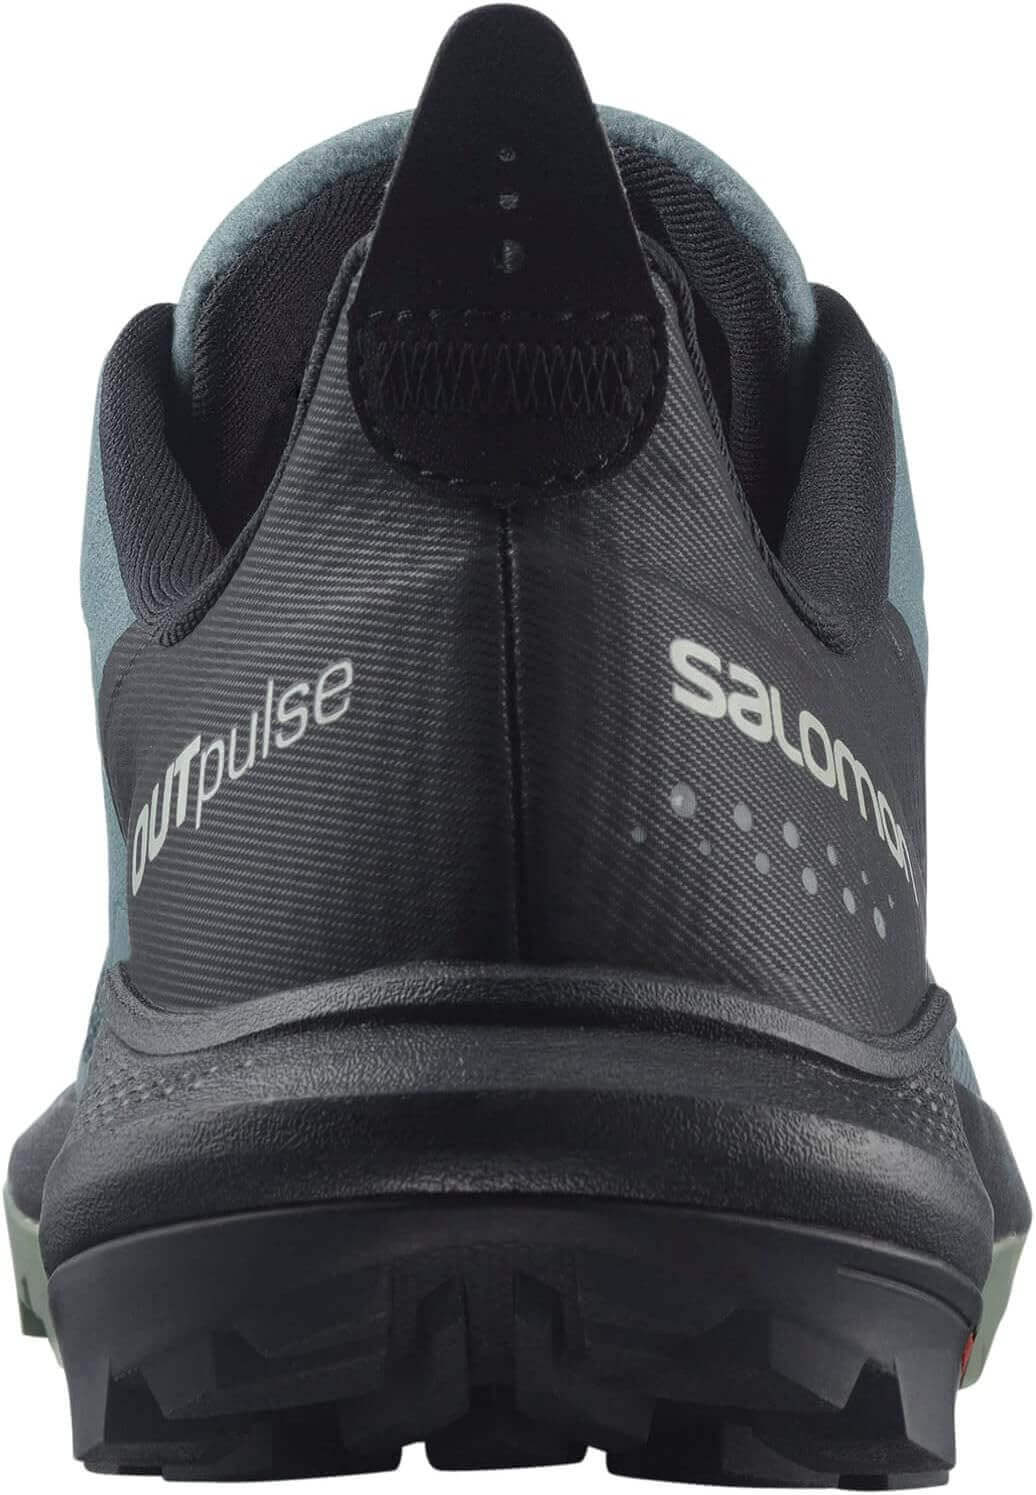 Shop The Latest >Salomon Women's OUTPULSE Hiking Shoes for Women > *Only $161.93*> From The Top Brand > *Salomonl* > Shop Now and Get Free Shipping On Orders Over $45.00 >*Shop Earth Foot*